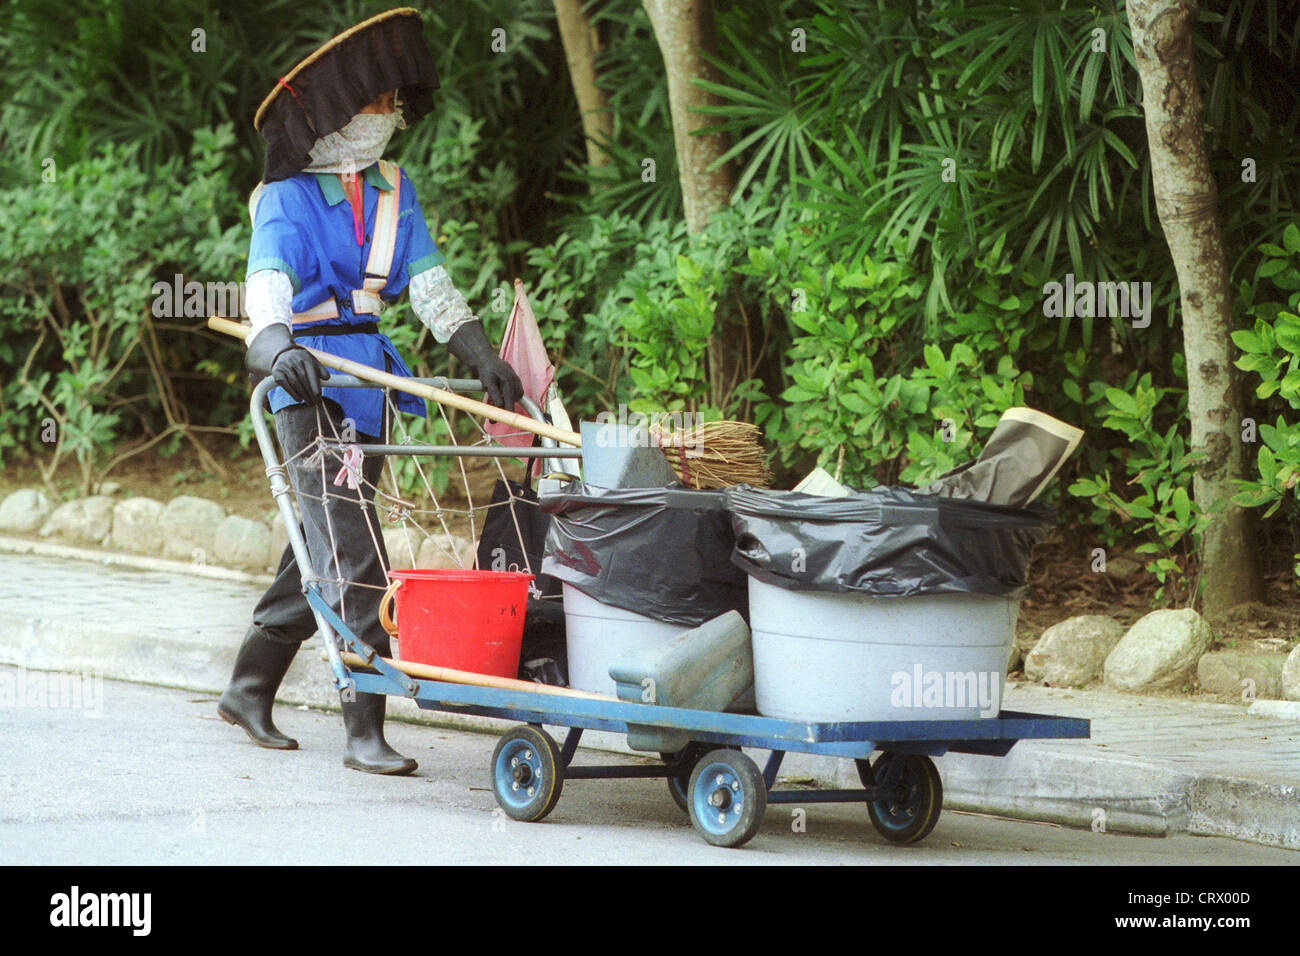 A woman cleaning the streets in Kowloon Stock Photo